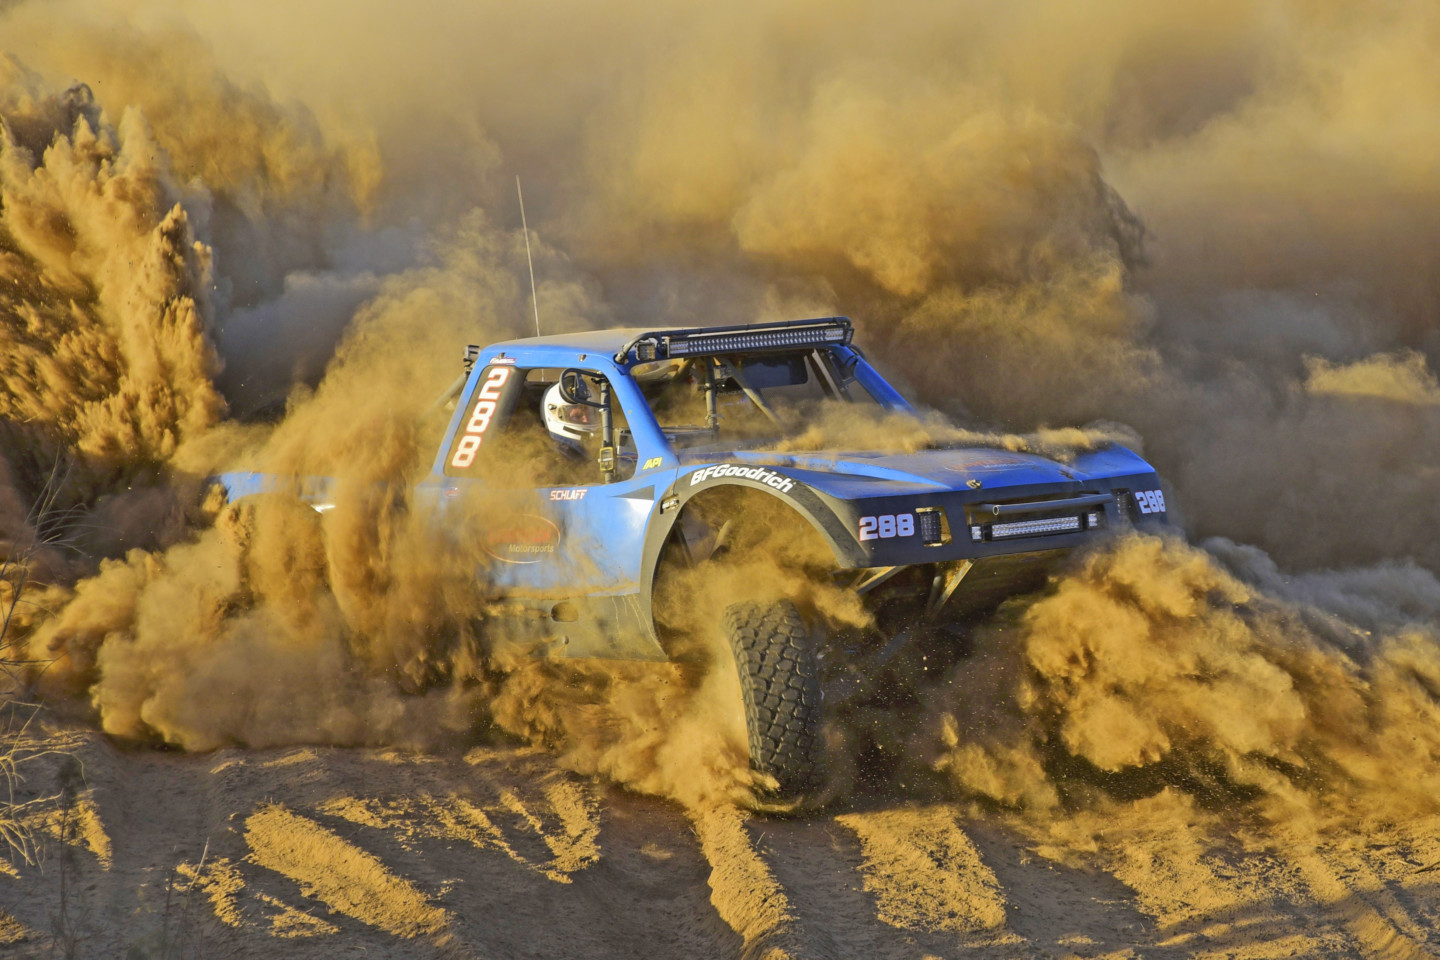 SCORE and BITD off-road desert racing series' offer thrills and spills galore for off-road racing fans.